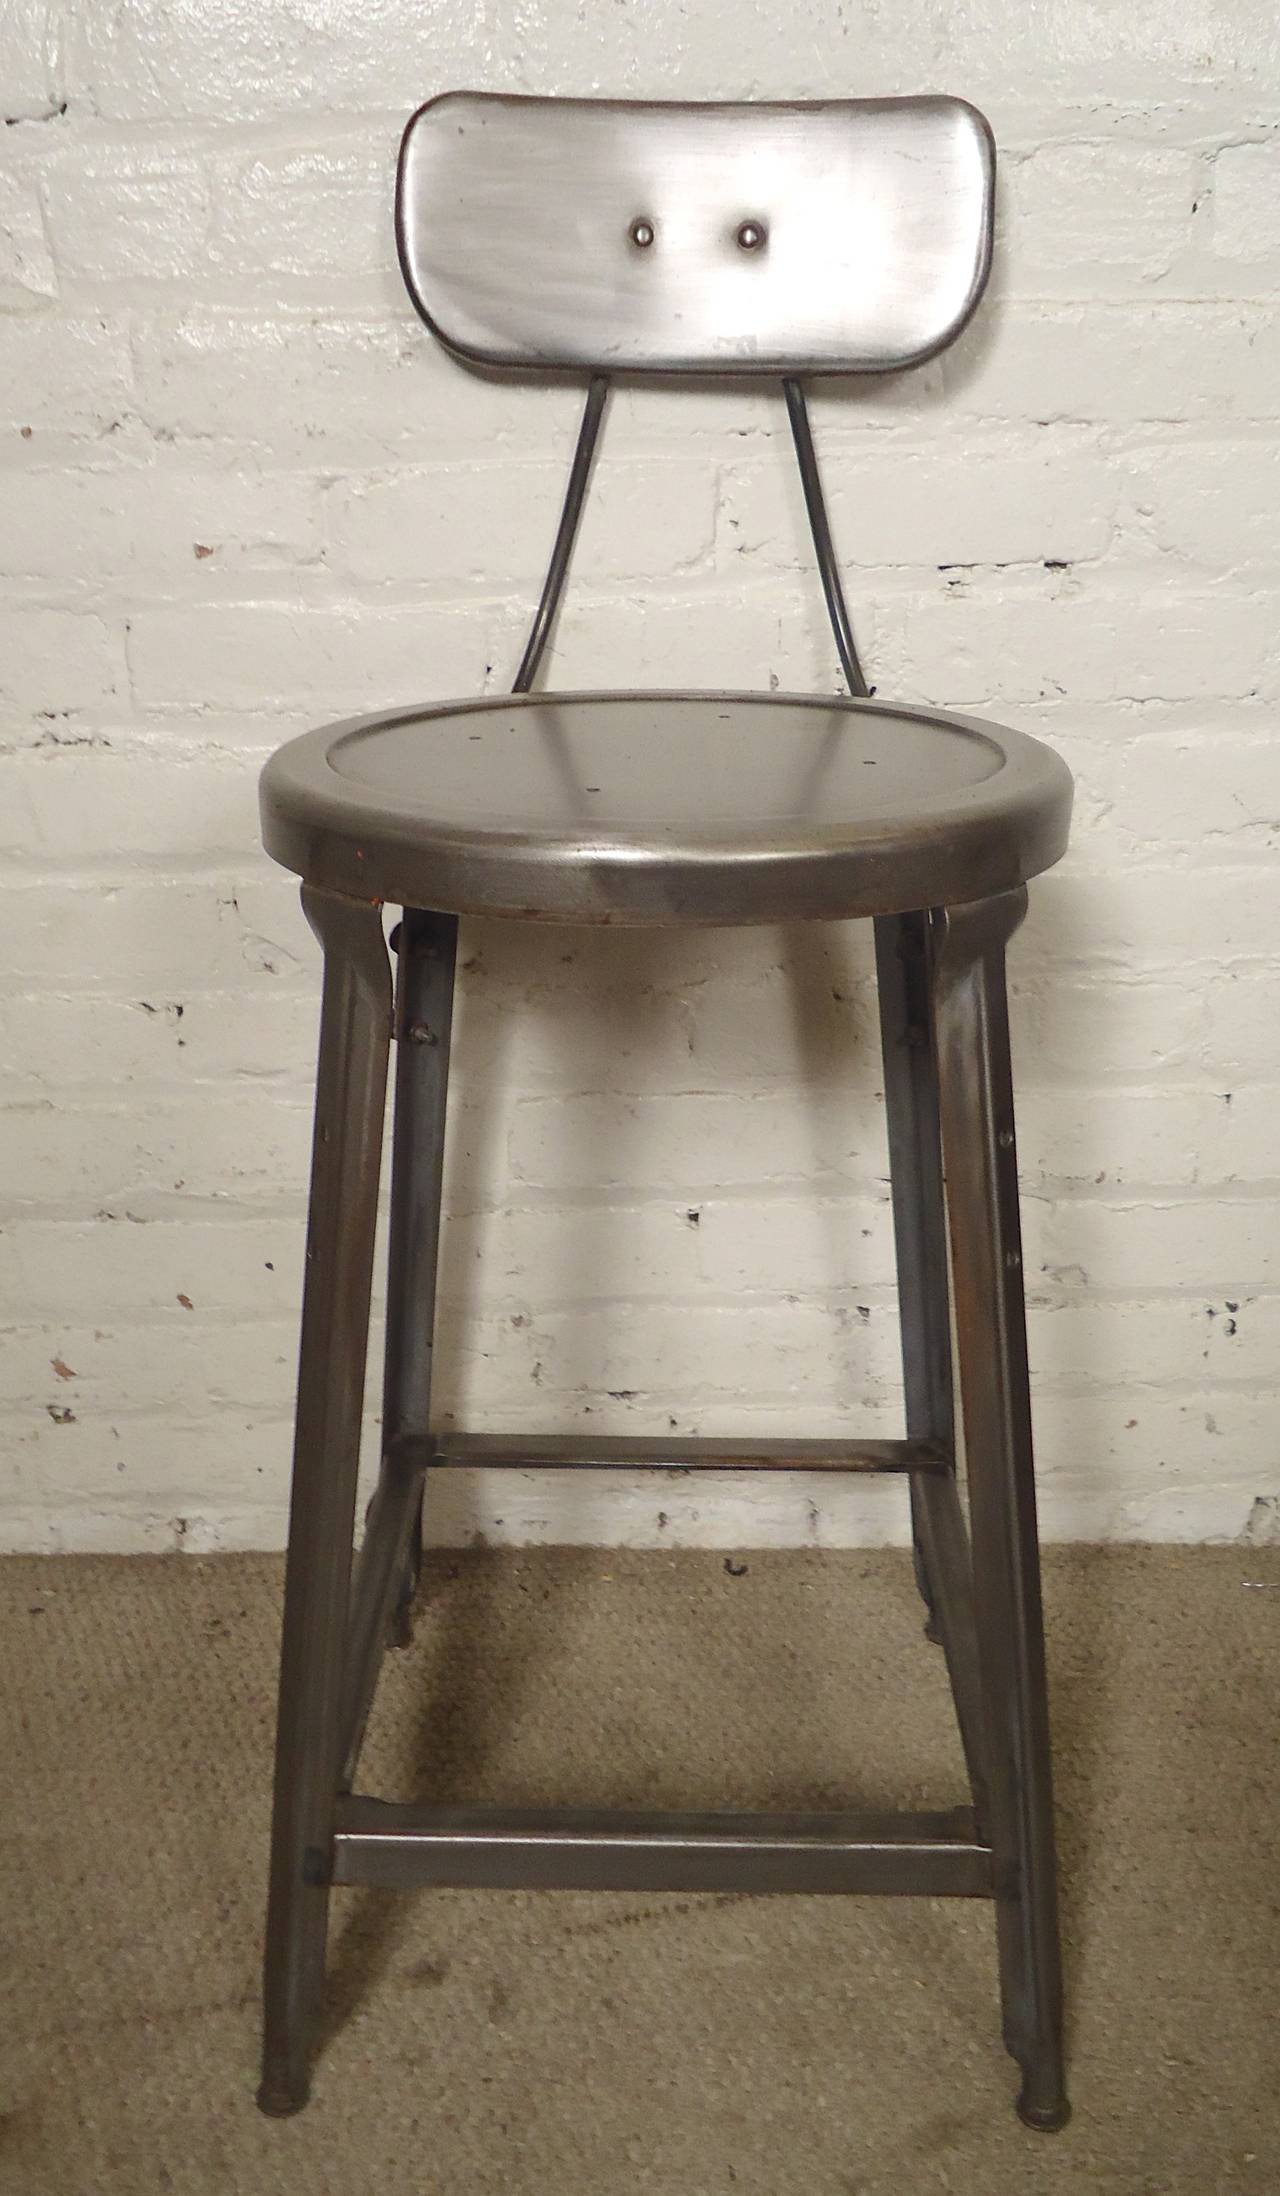 Vintage factory stools refinished with a bare metal style finish. Smaller than the average stool at 24